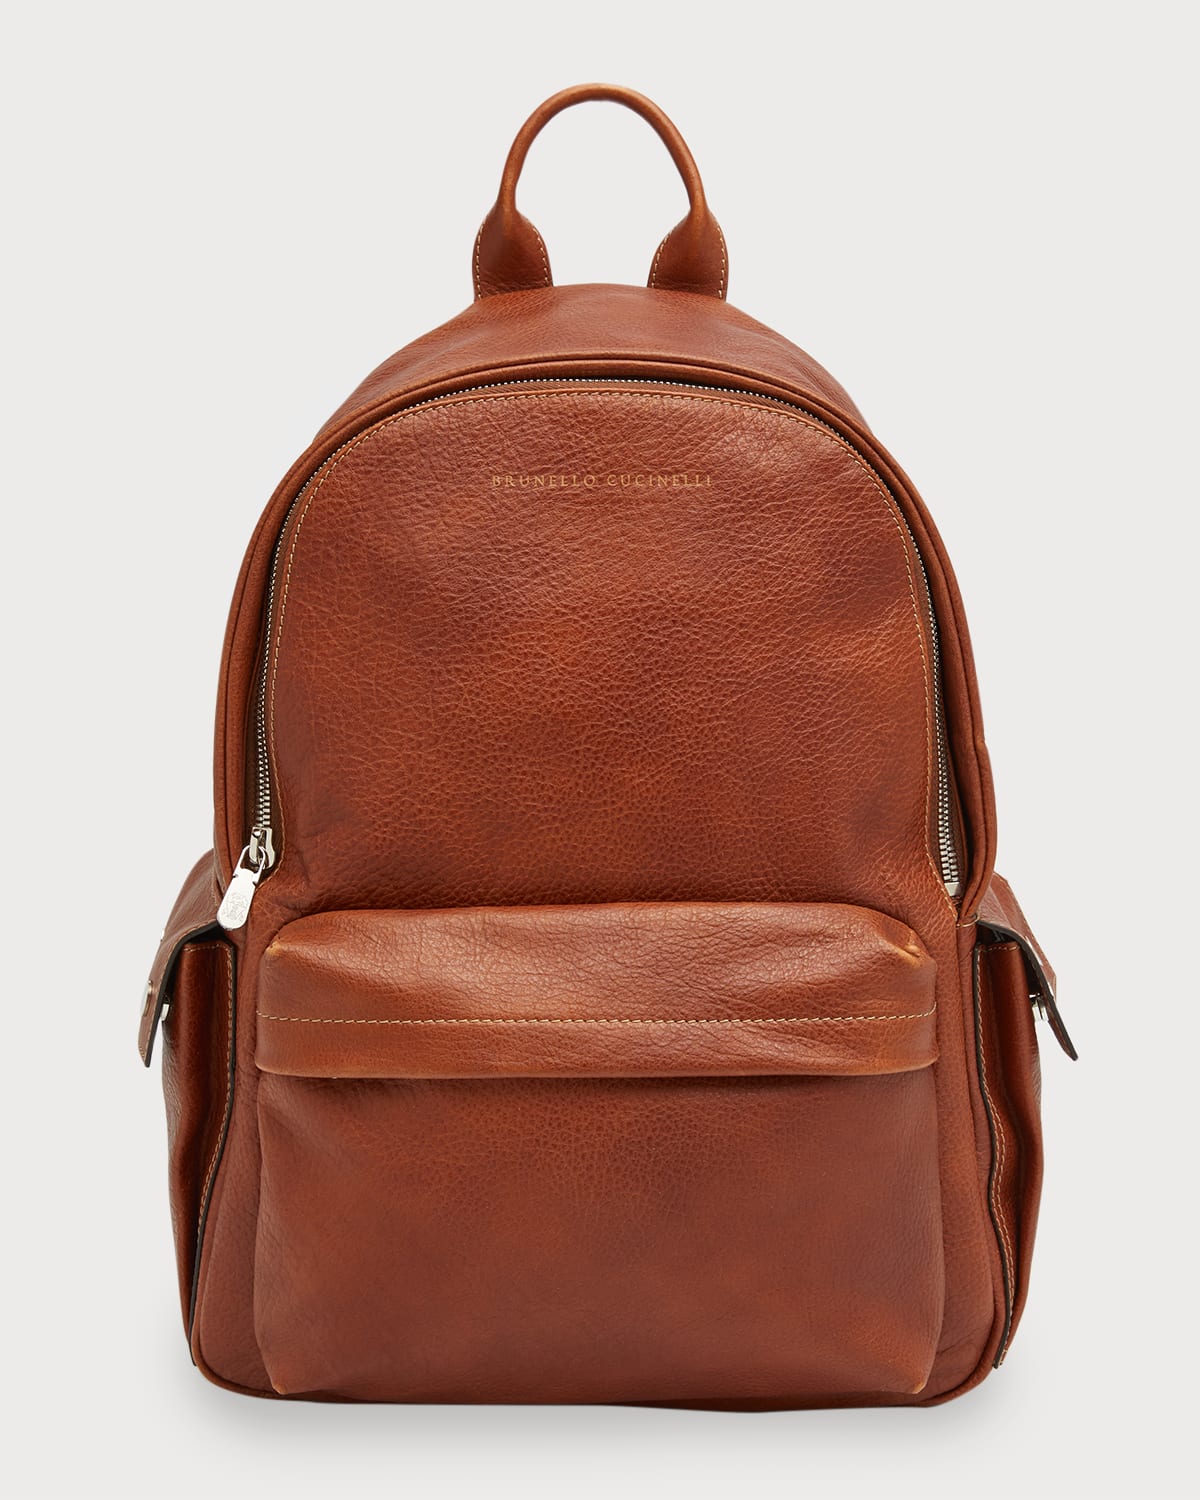 Brunello Cucinelli Grained Leather Backpack In C6608 Copper